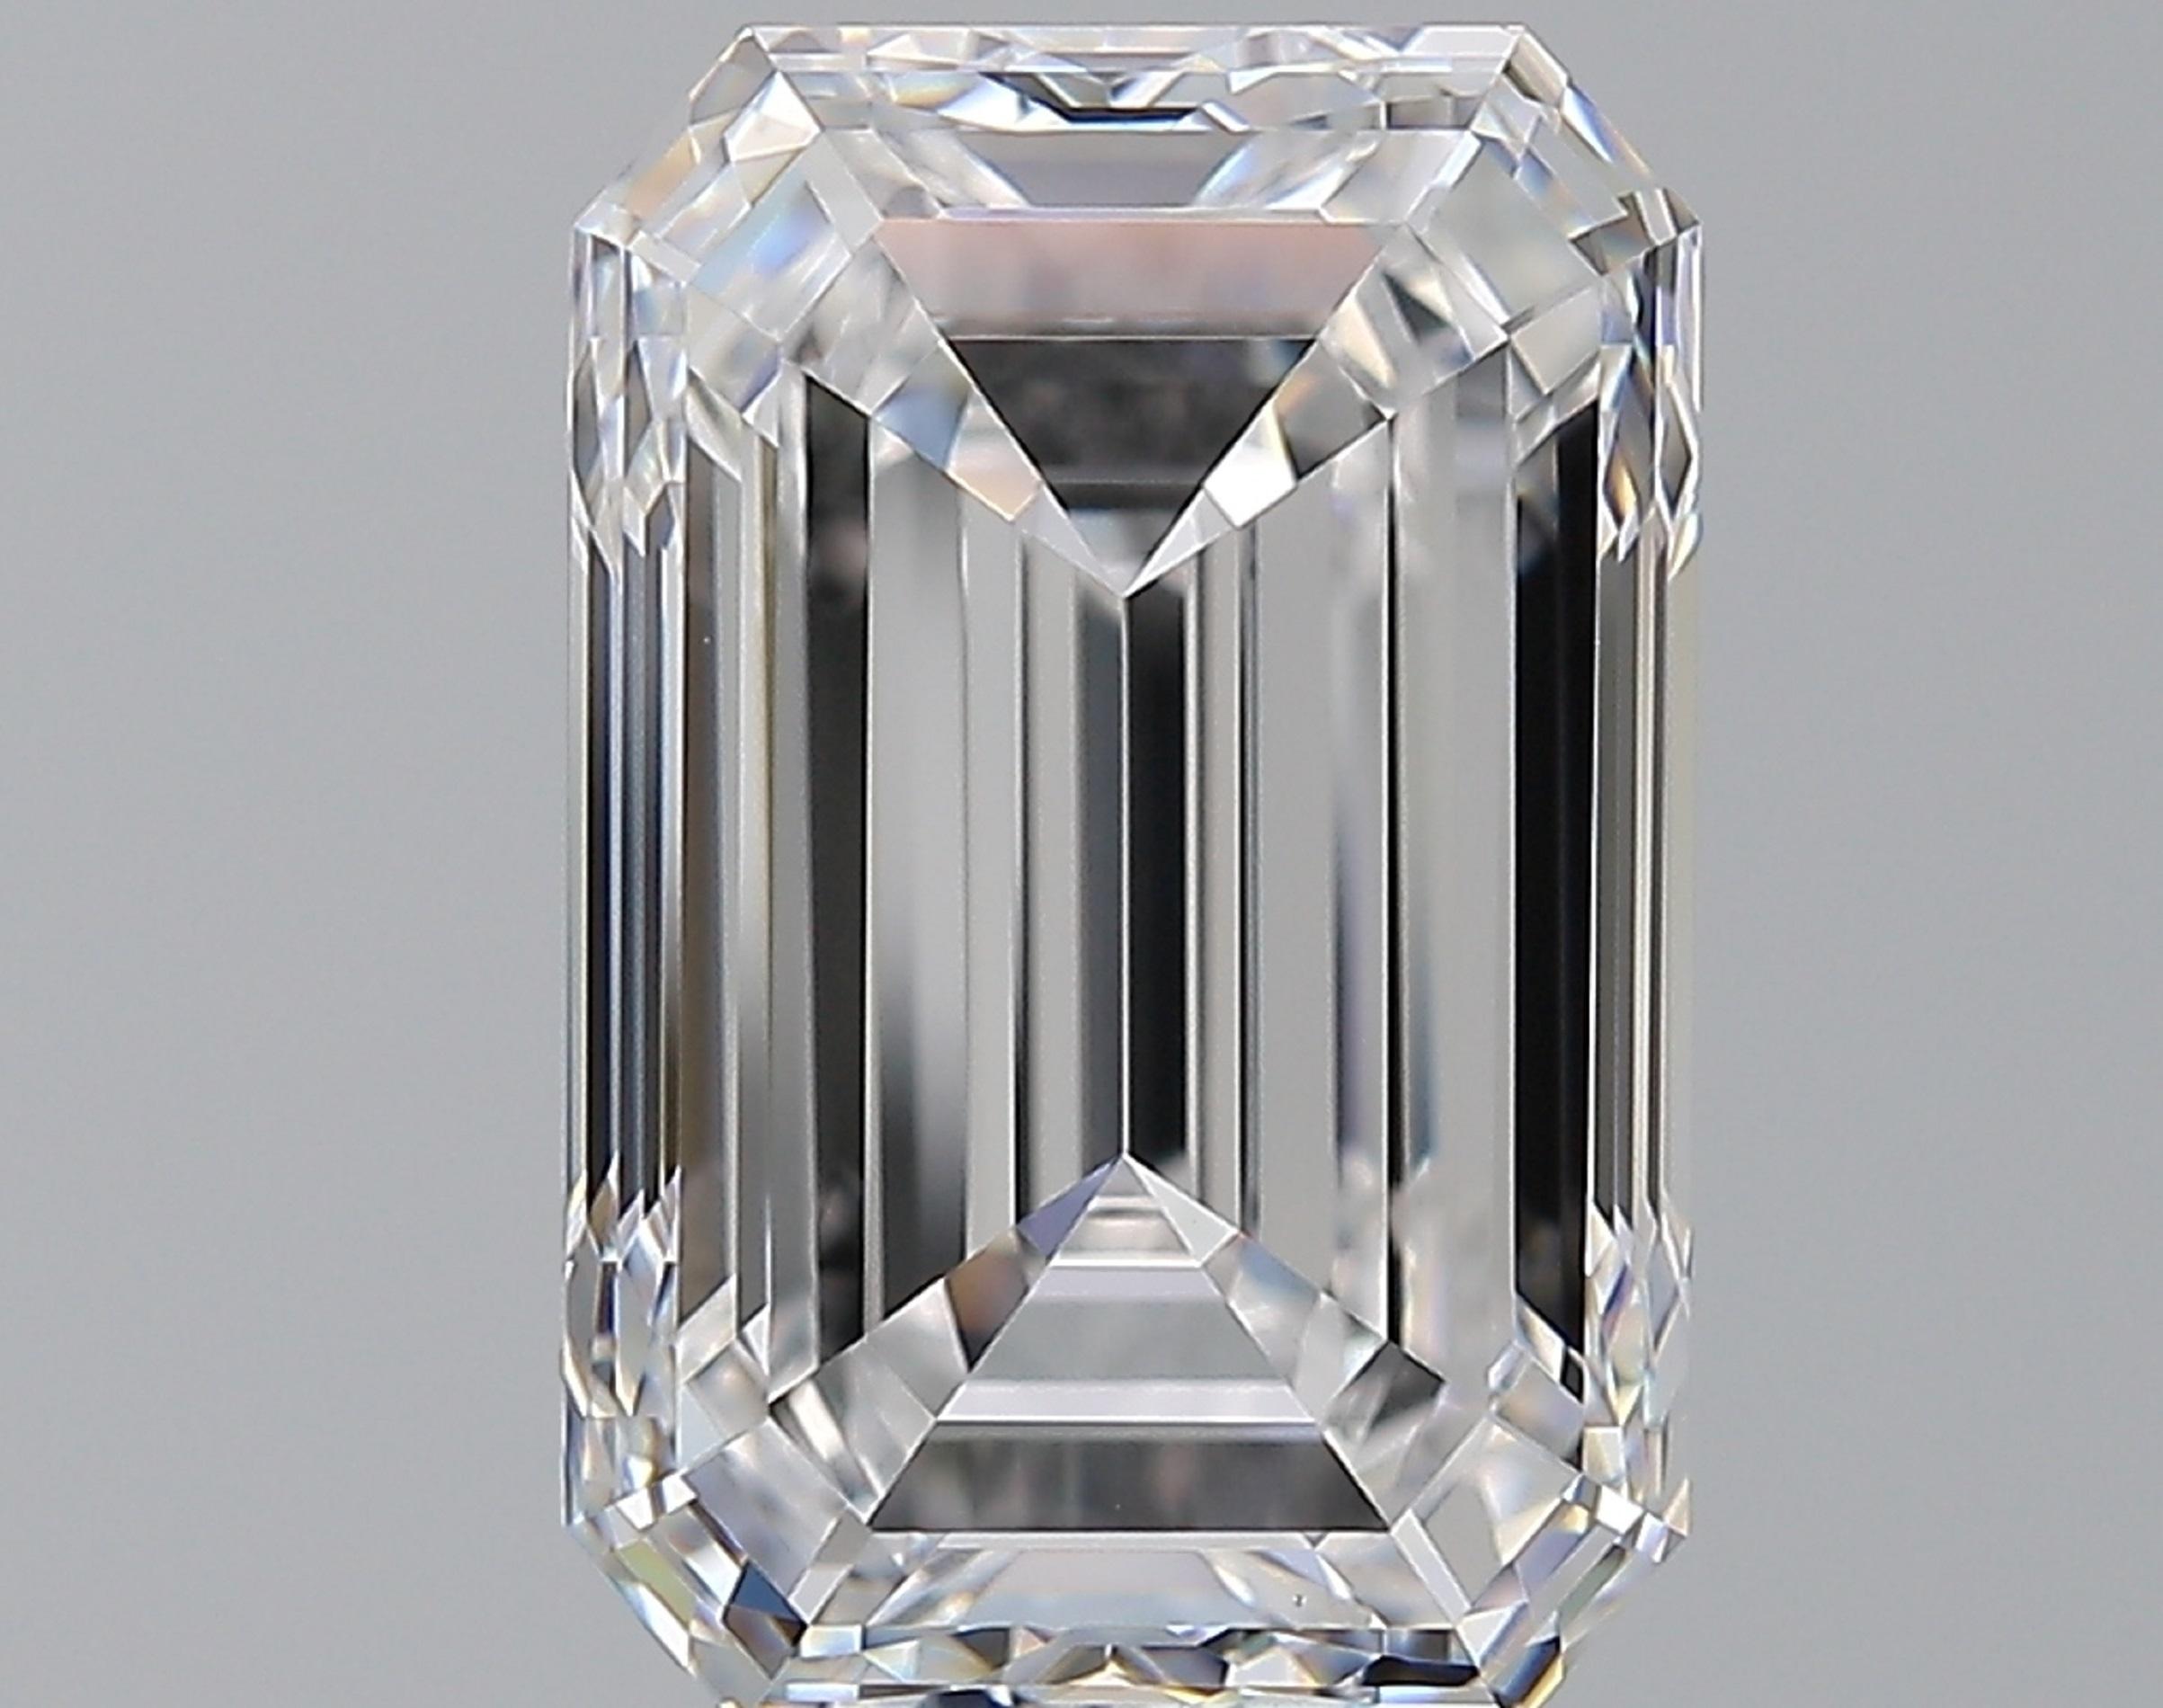 an exquisite and ideal cut emerald cut diamond certfied by GIA
D COLOR
VS1 CLARITY
